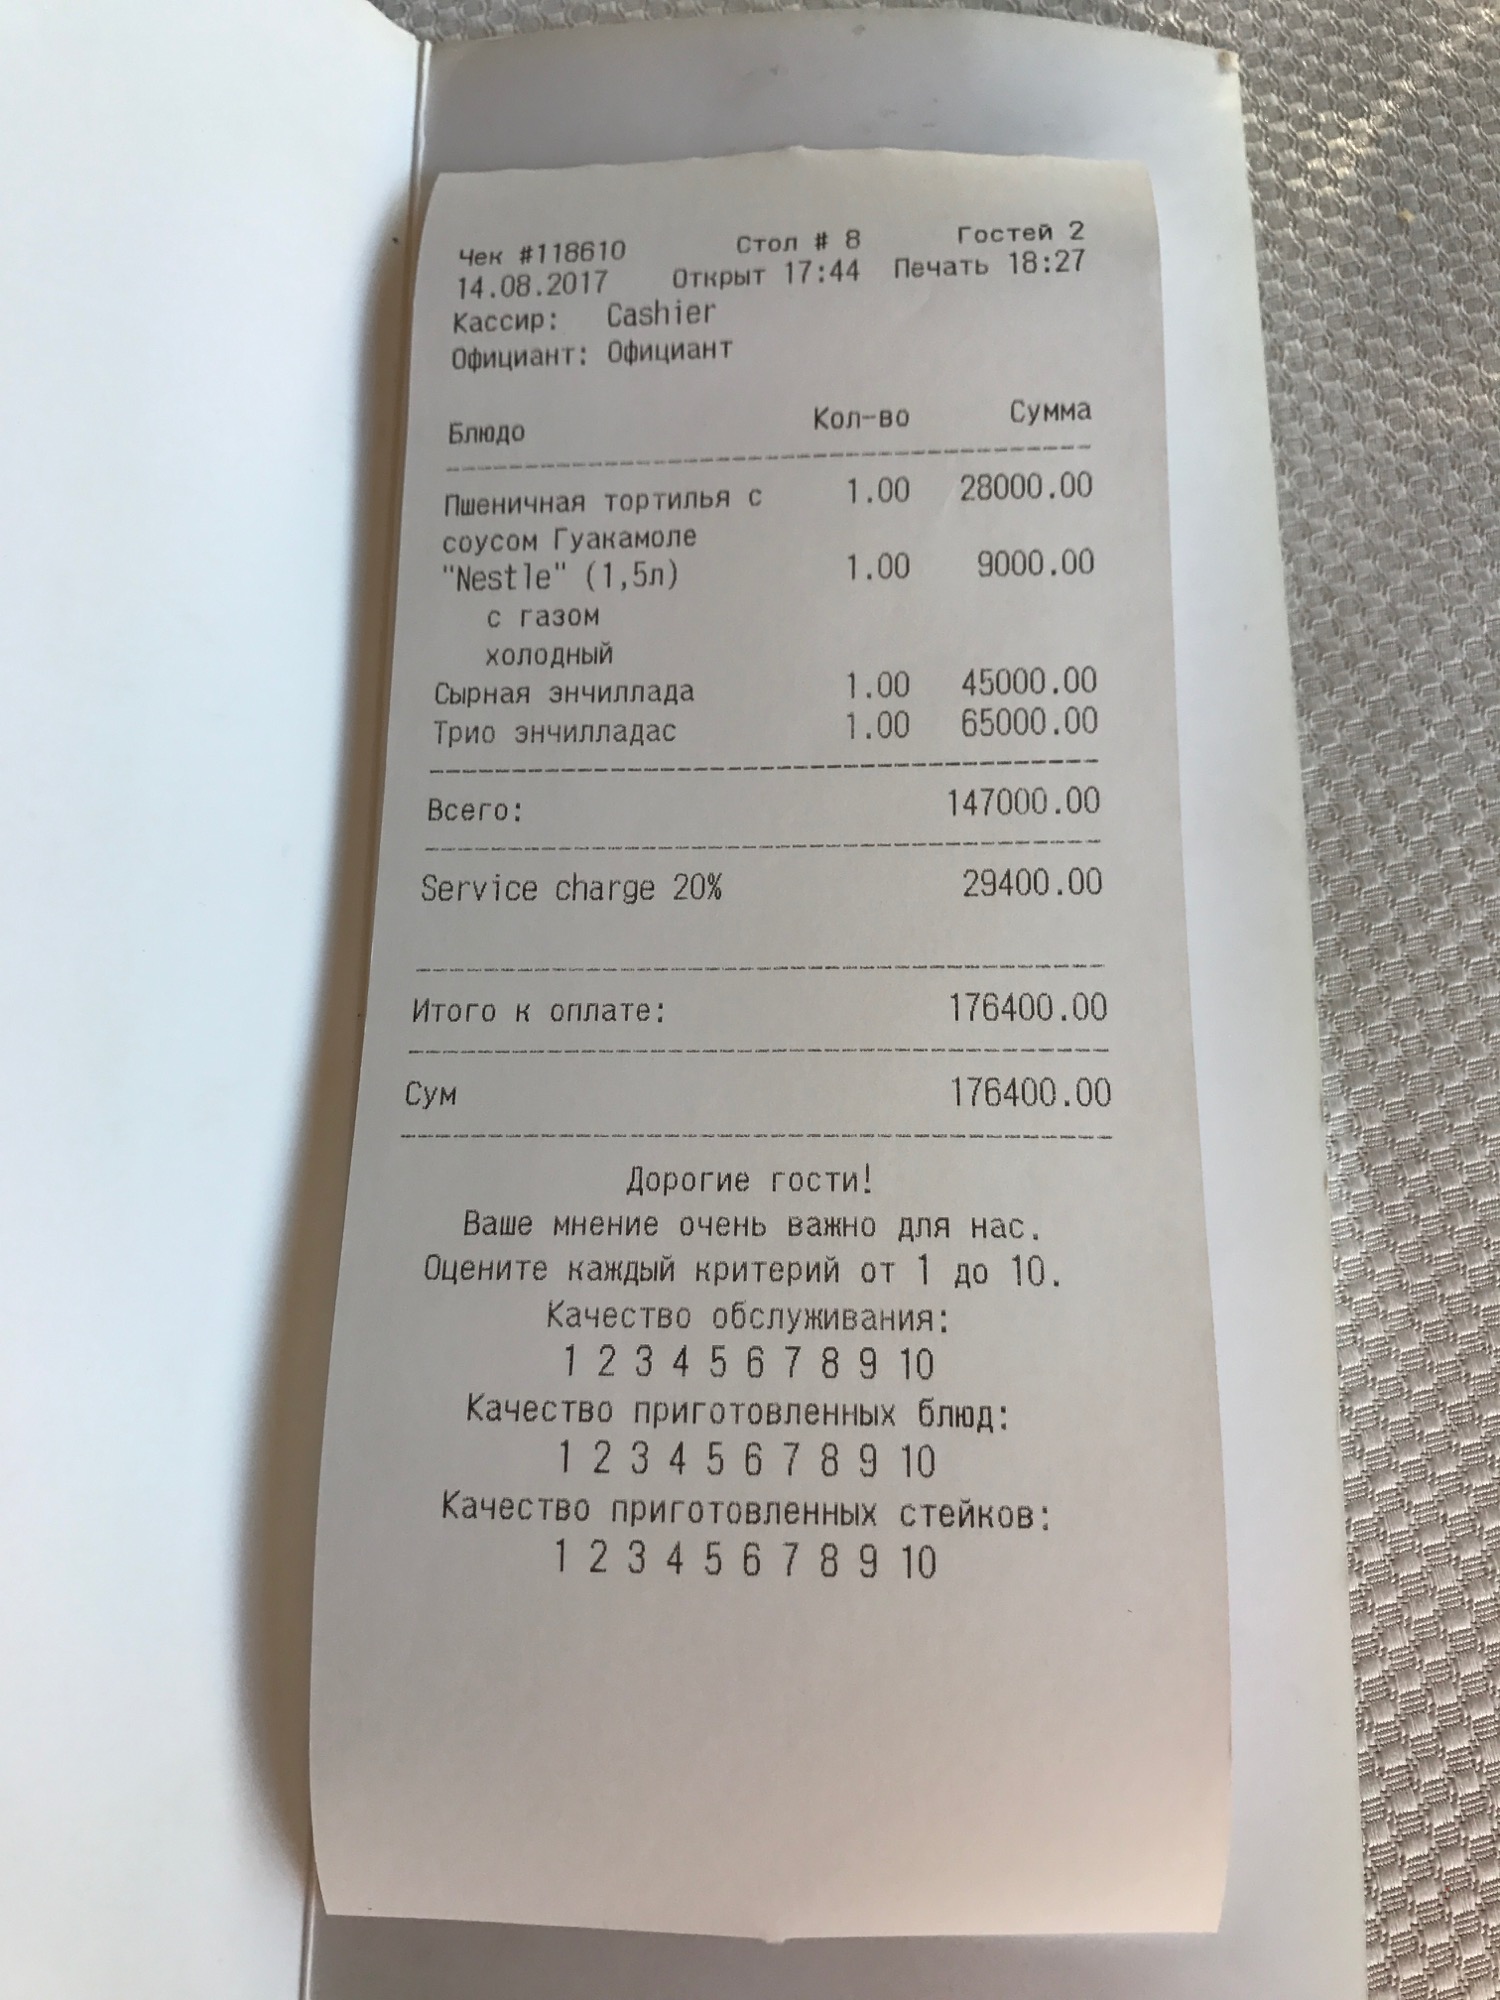 a receipt with numbers and letters